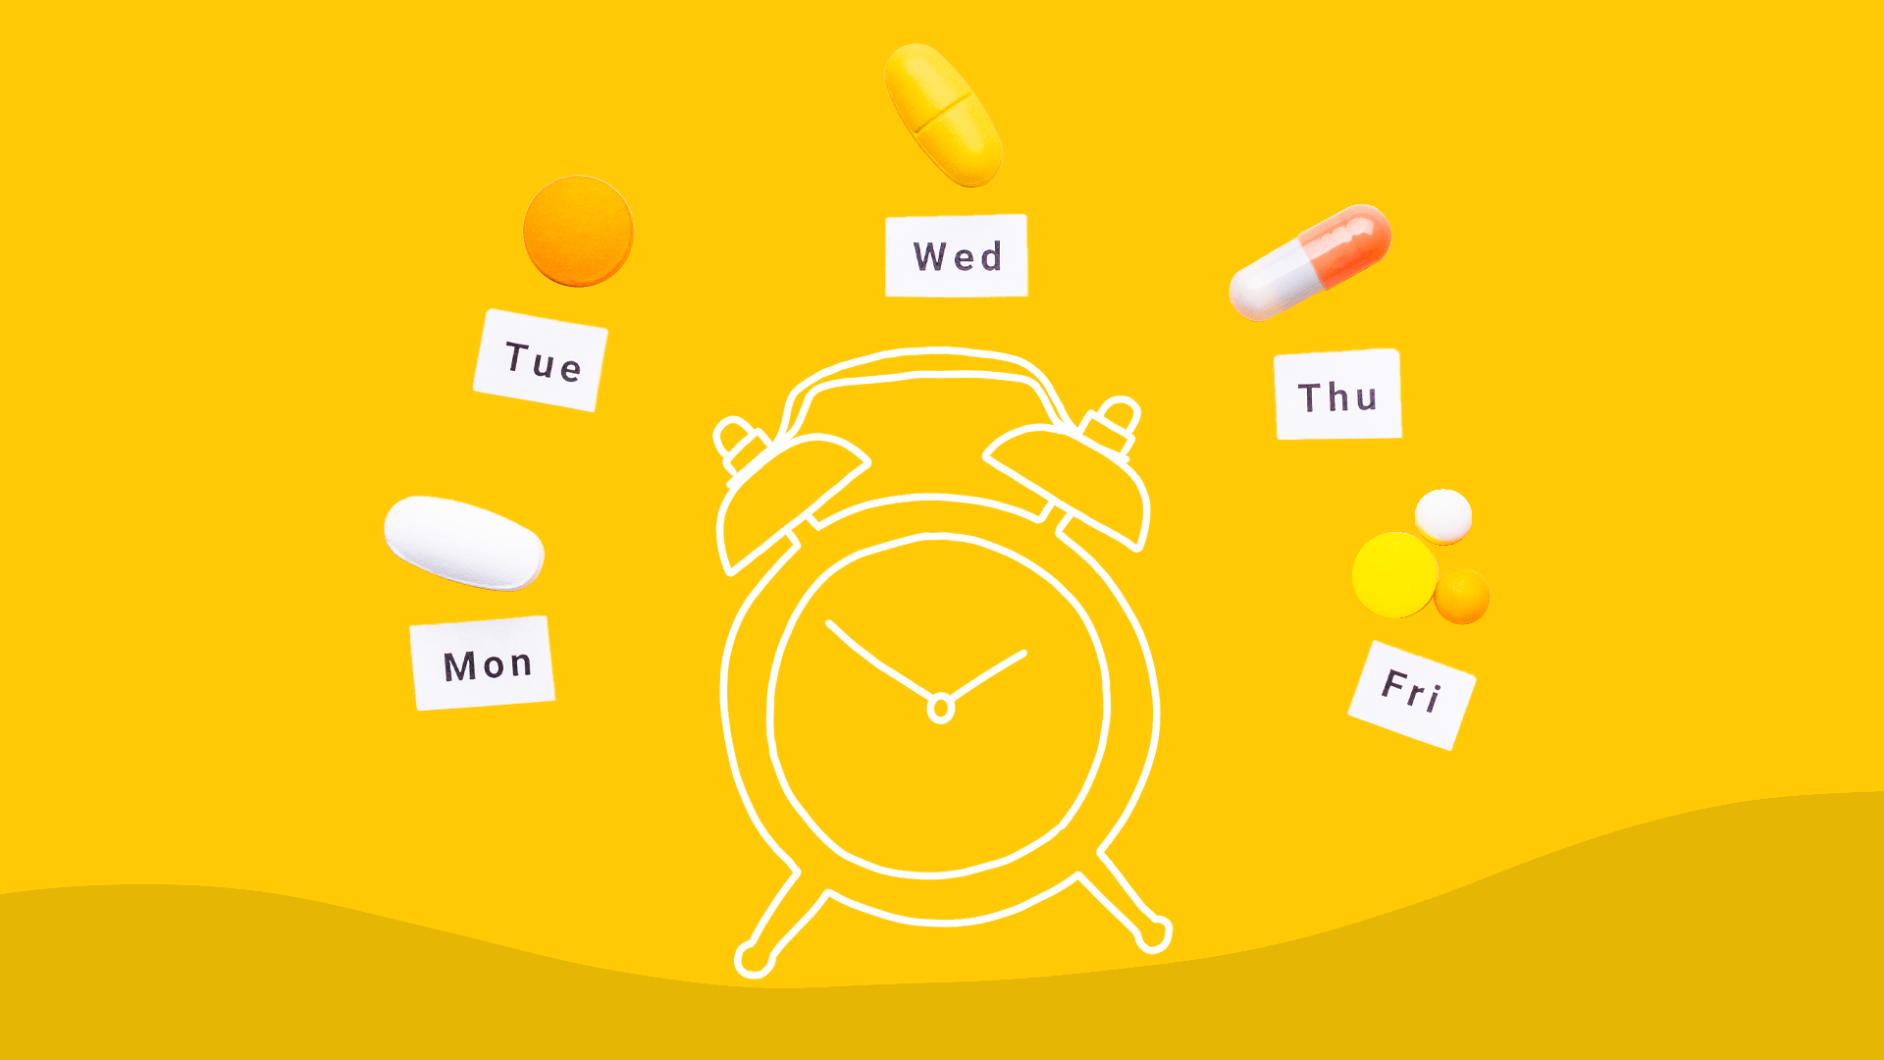 Alarm clock with pills corresponding to different days of the week: How to use medication list templates for medication management